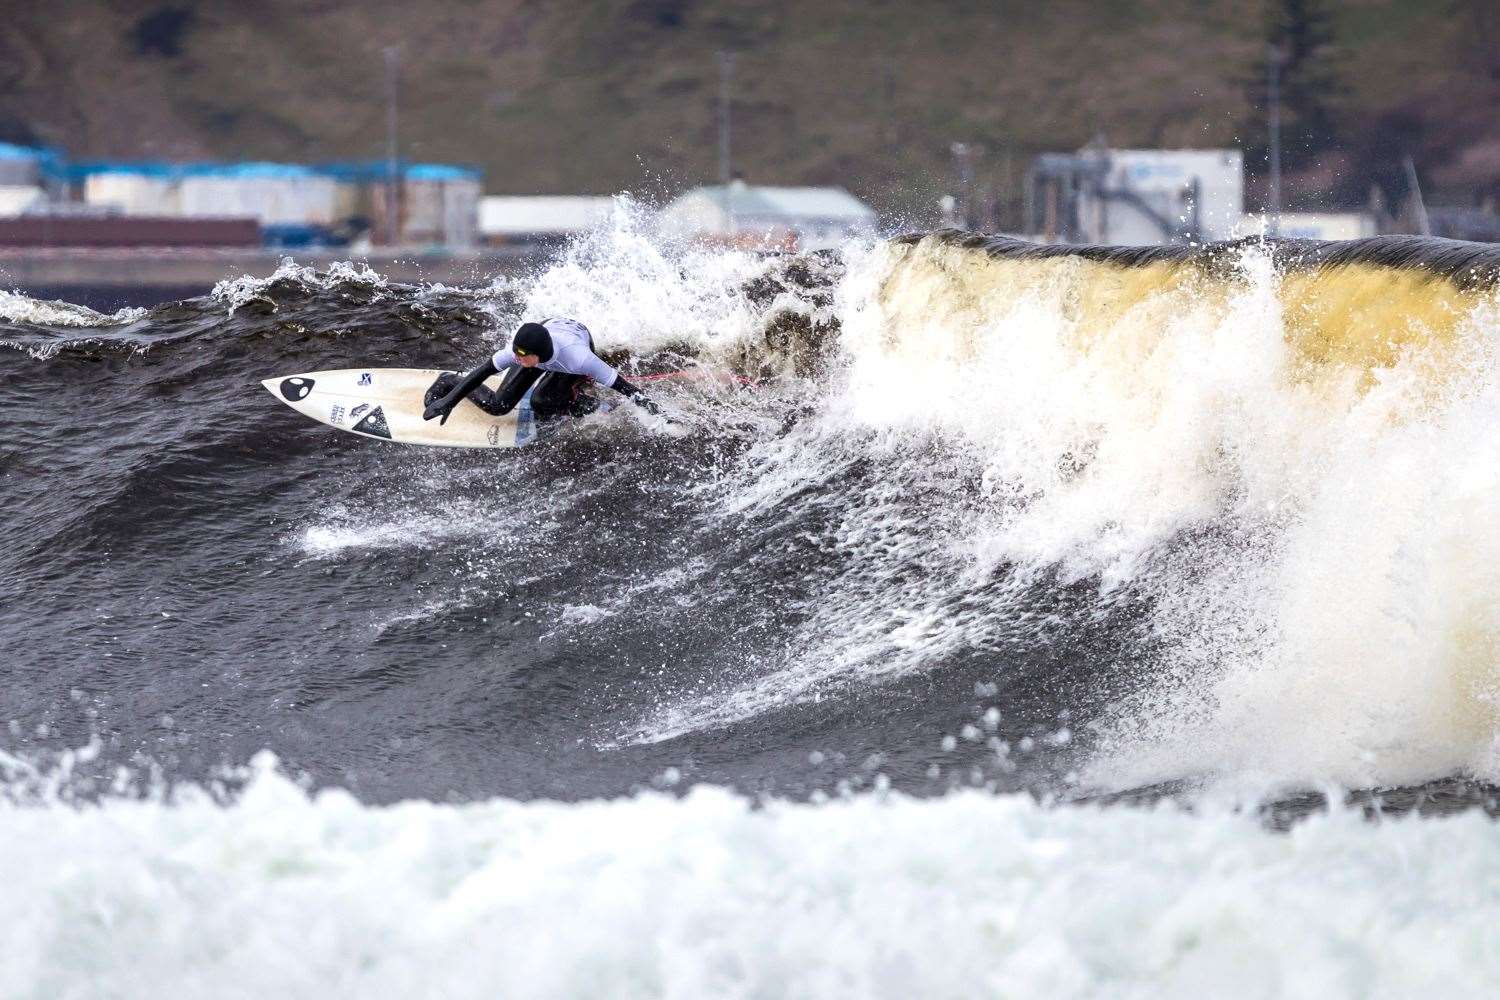 Thurso's Phoebe Strachan came fifth overall in the women's division of the British Surfing Championships. Picture: Studiograff Photography